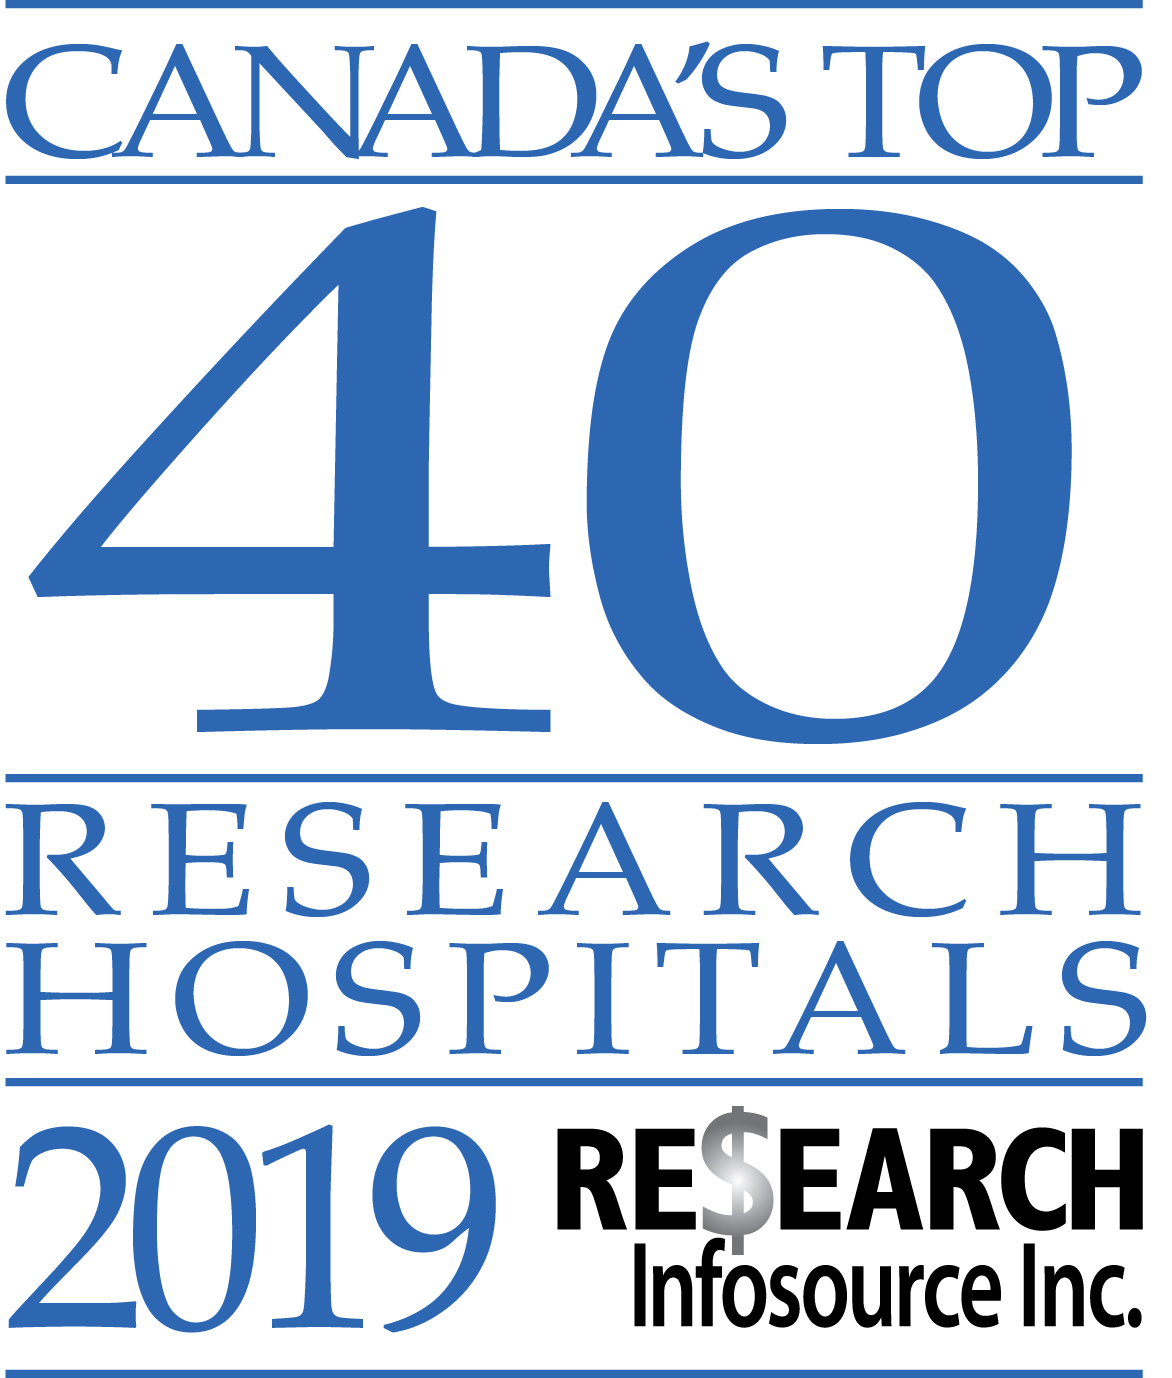 Canadian top 40 research hospital list 2019